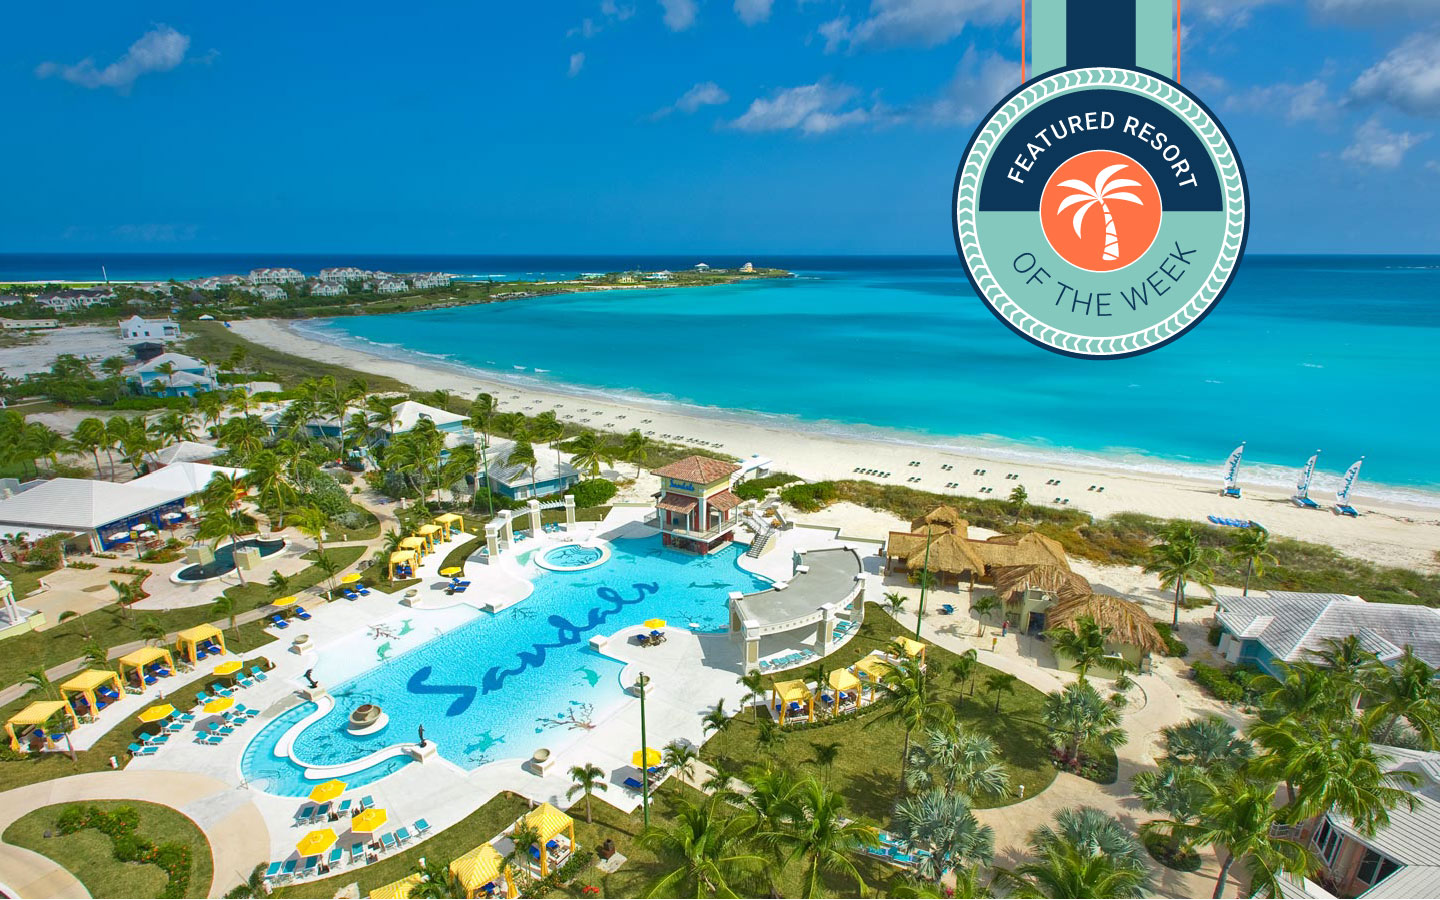 ^A61942252492057F970DD8EE2D90C4714C7F7A7E9A4143D6FD^pimgpsh_fullsize_distr Featured Resort of the Week: Sandals Emerald Bay